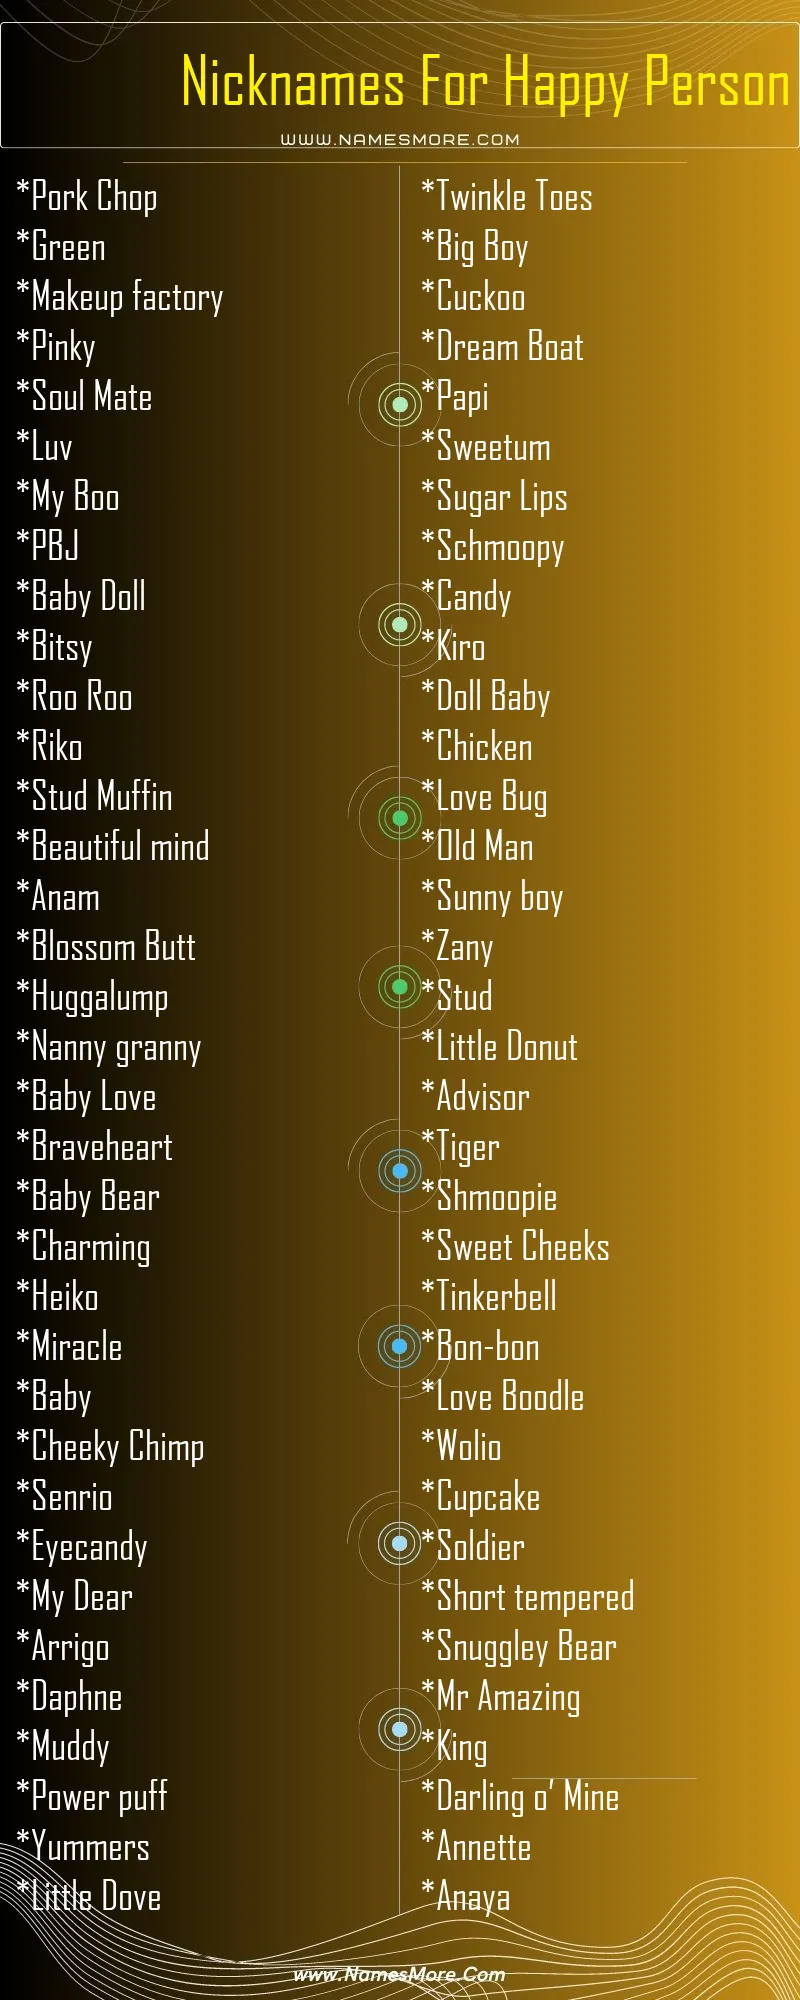 2900+ Nicknames For Happy Person (Funny & Best) List Infographic